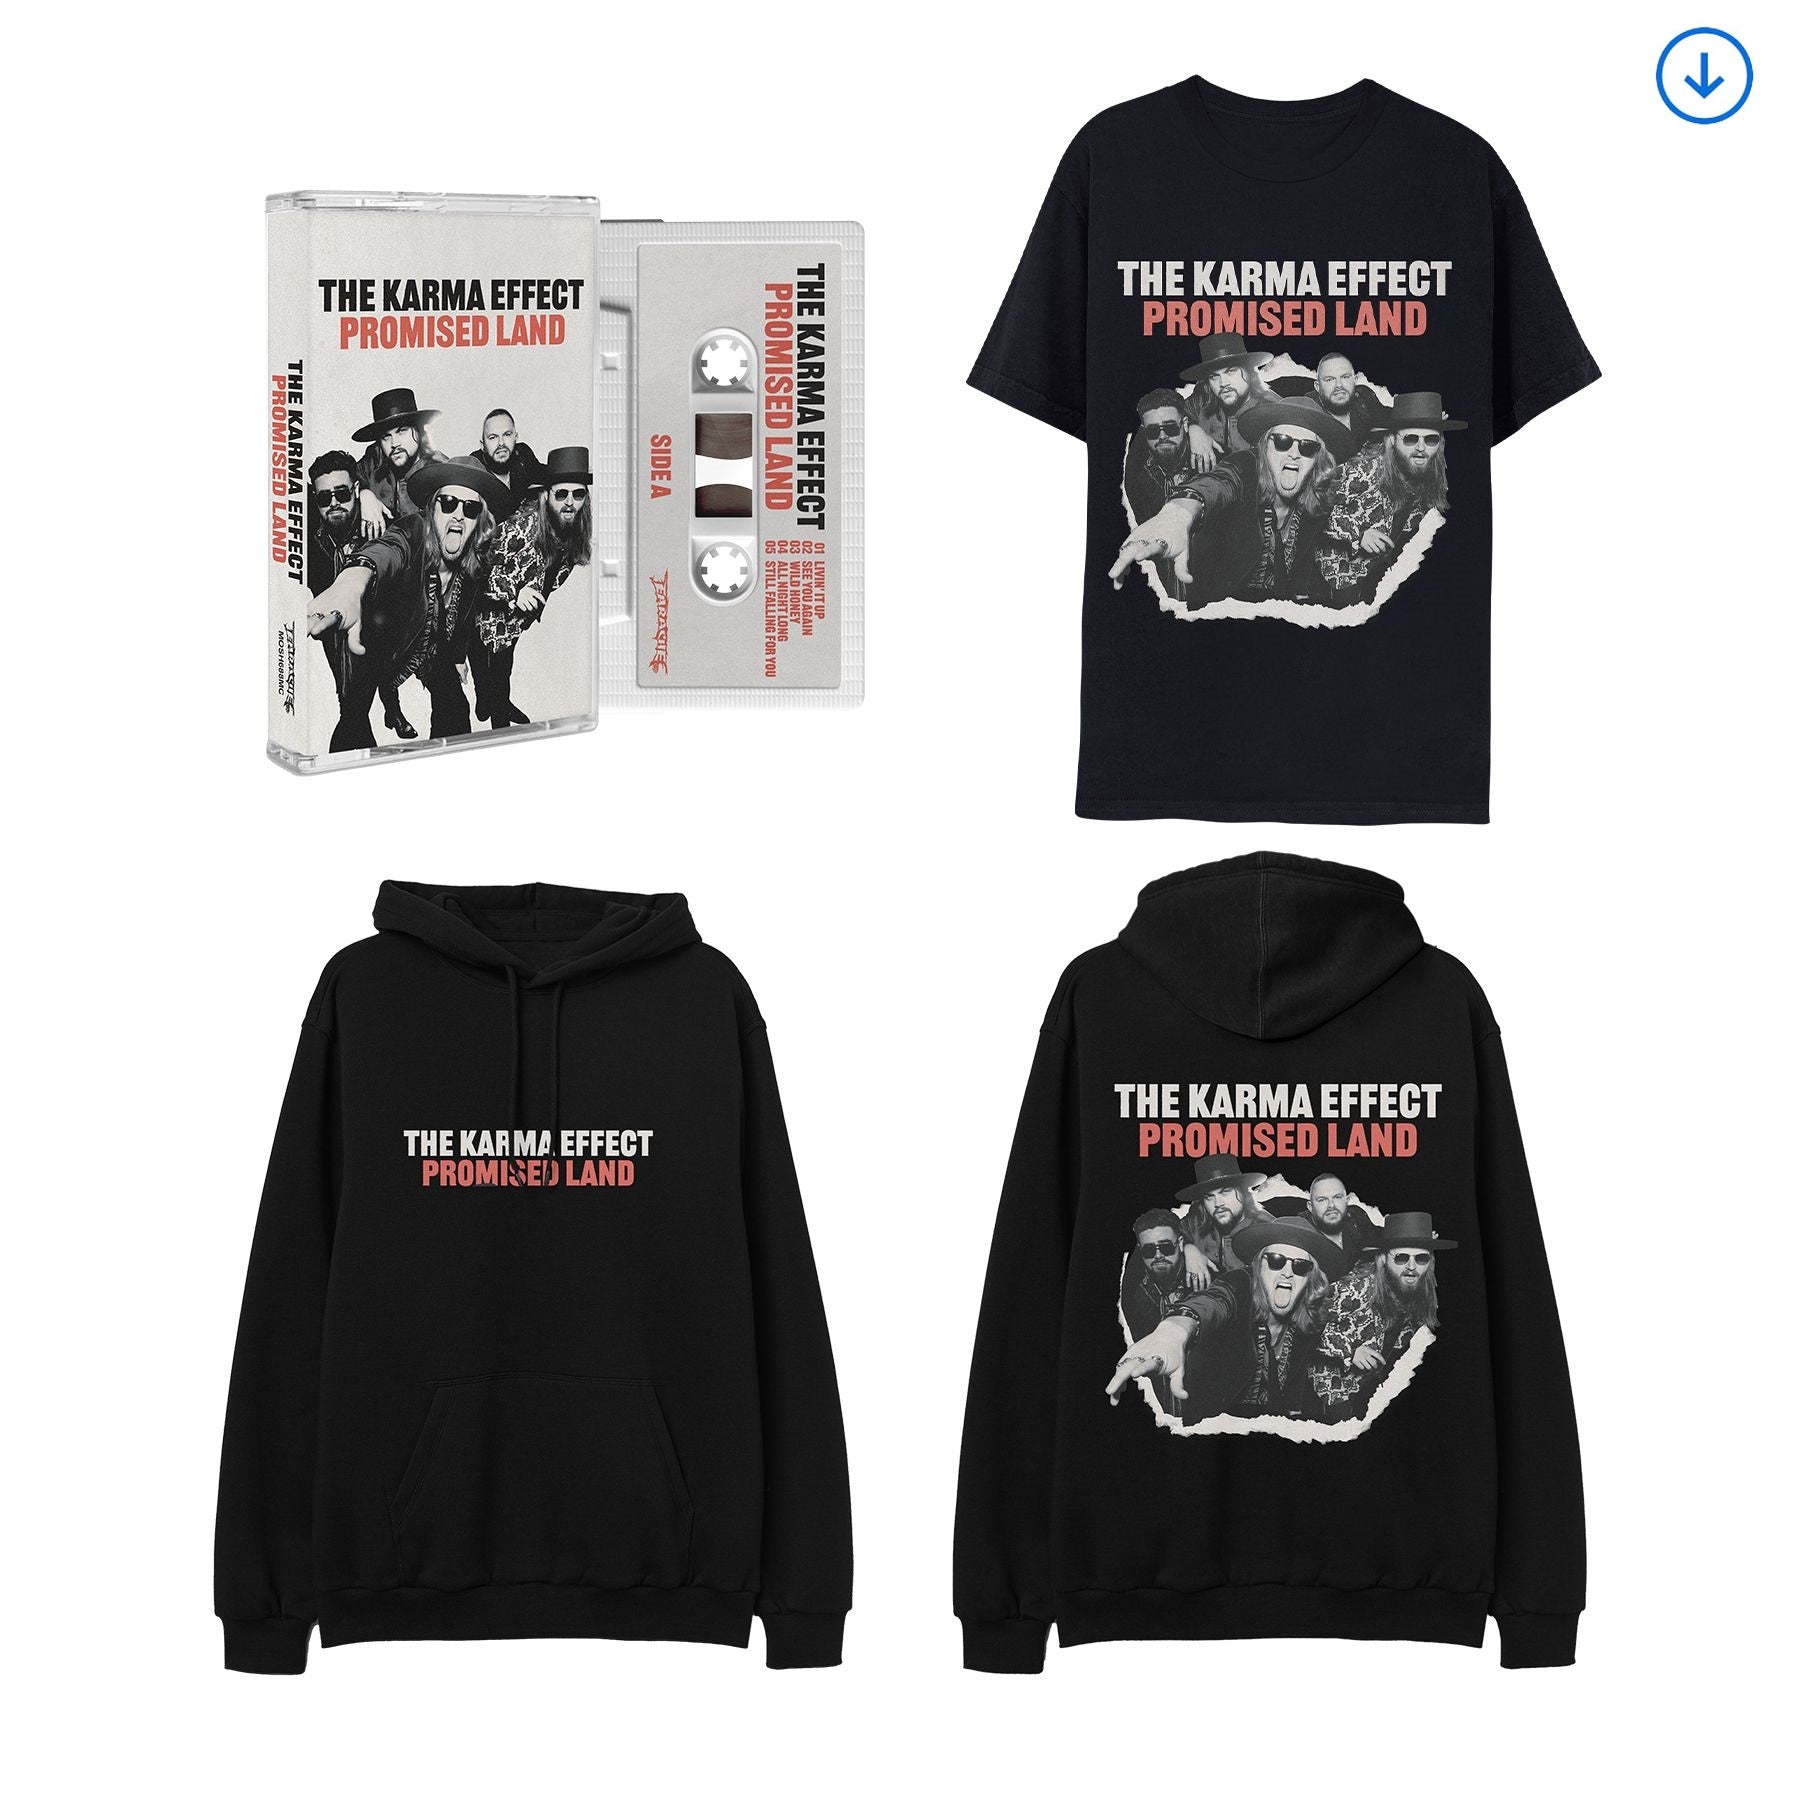 The Karma Effect "Promised Land" Cassette Tape, Download, T shirt and Hoodie